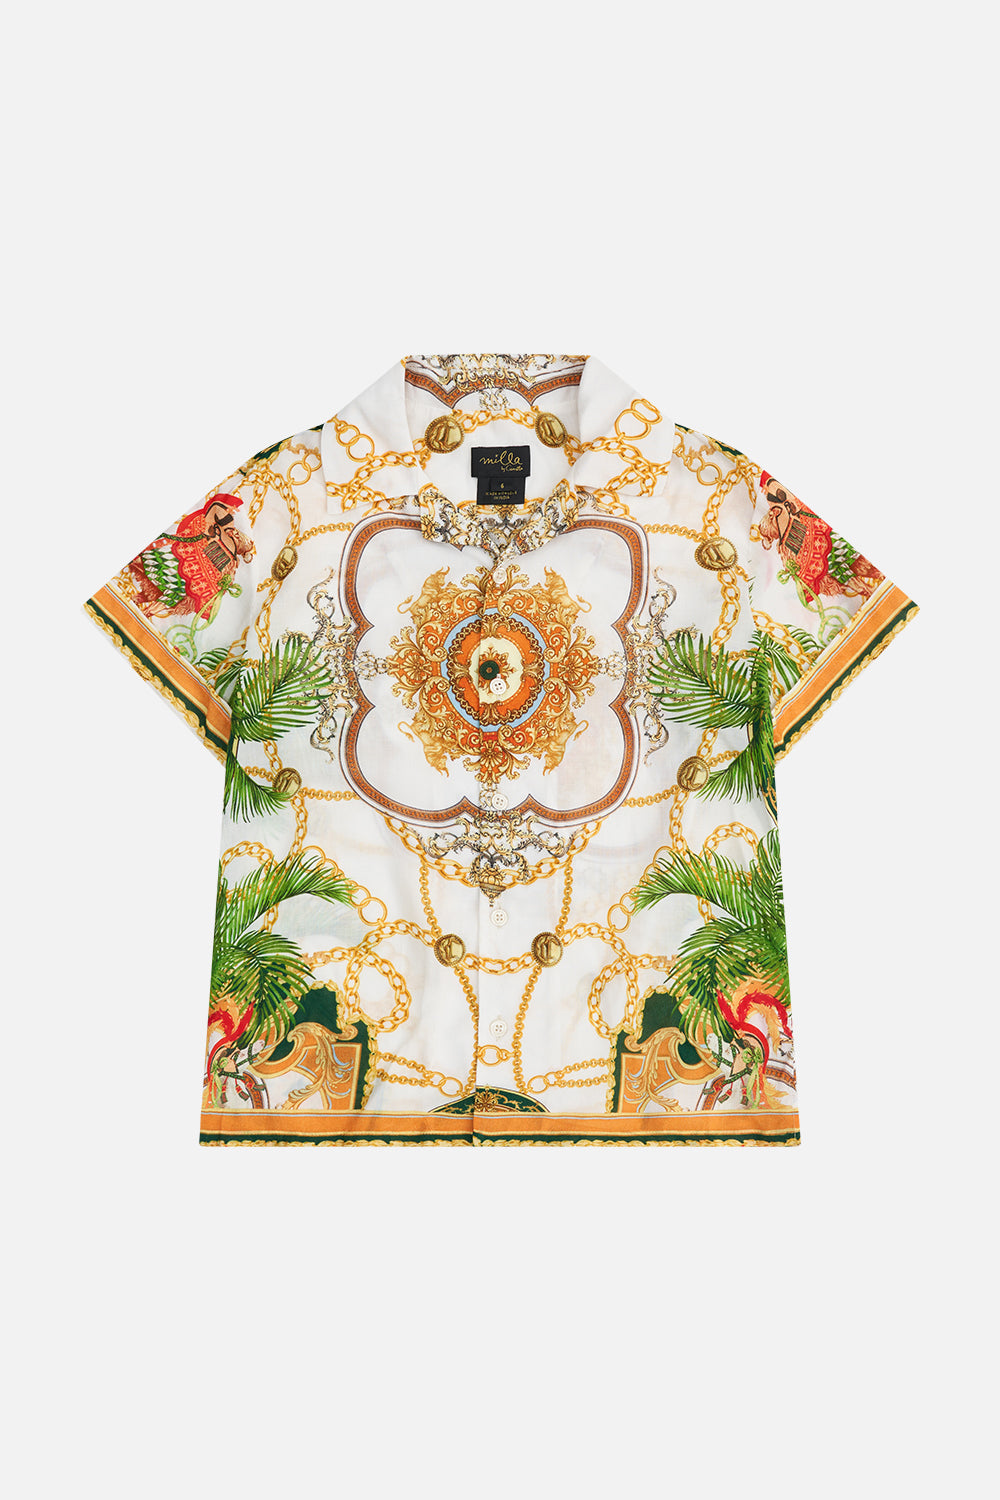 Product view of MILLA By CAMILLA boys short sleeve shirt in My Sweet Devotion print